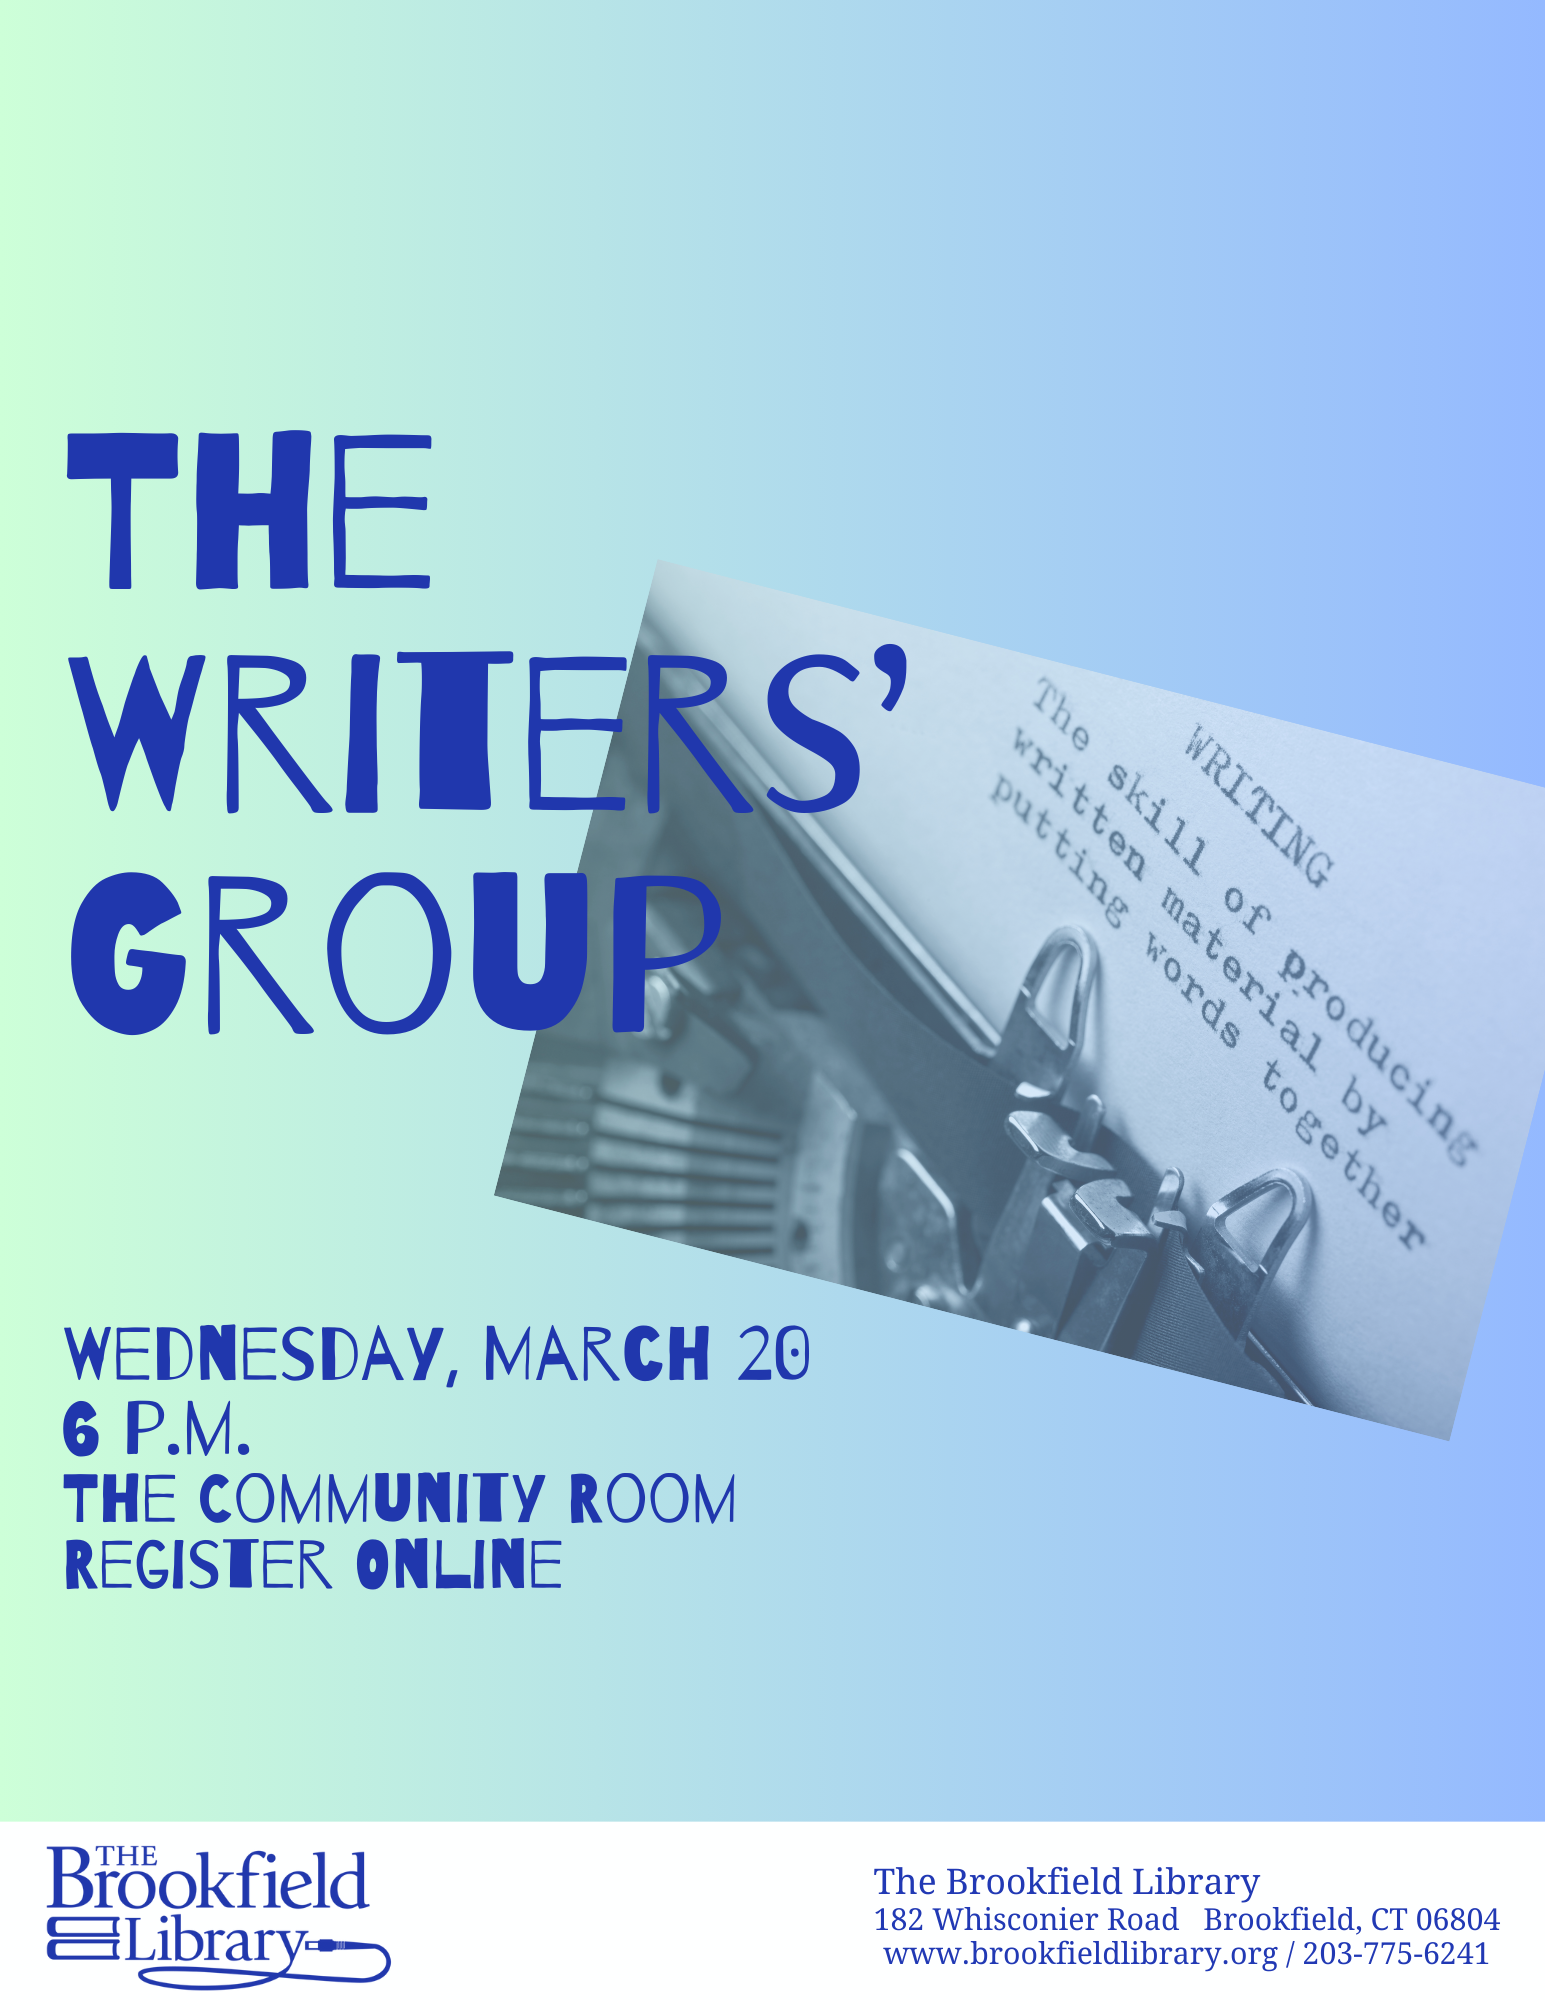 Flyer for Writers' Group Meeting